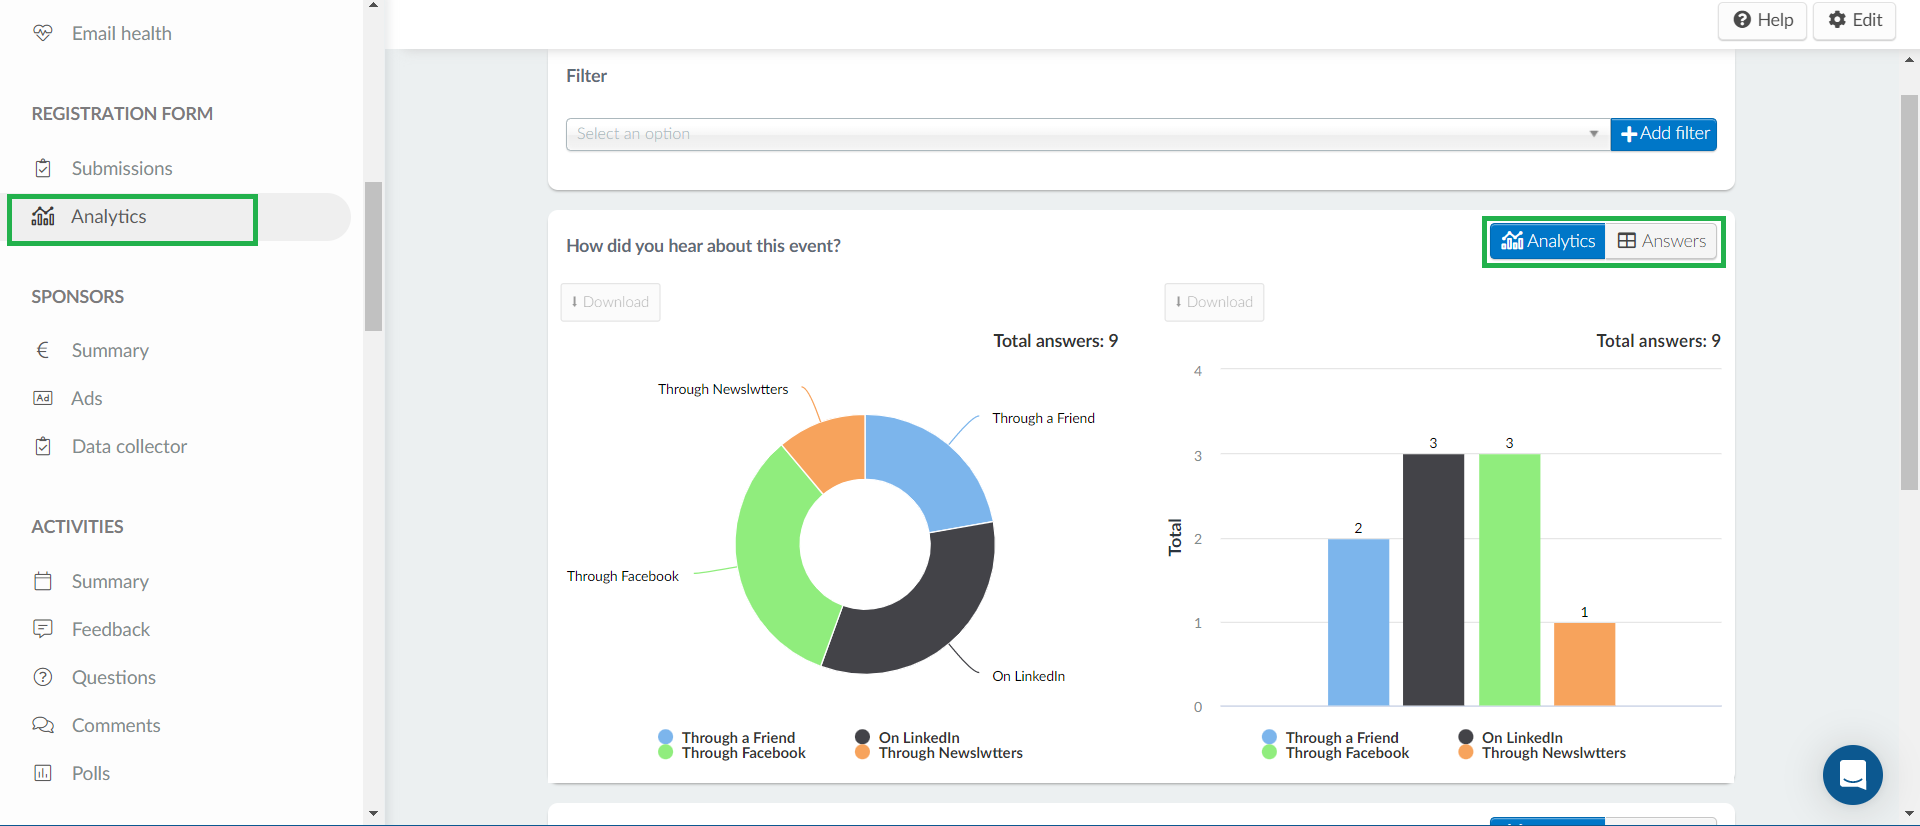 Image showing the Registration form Analytics page as well as the option to view Answers or Analytics in charts format